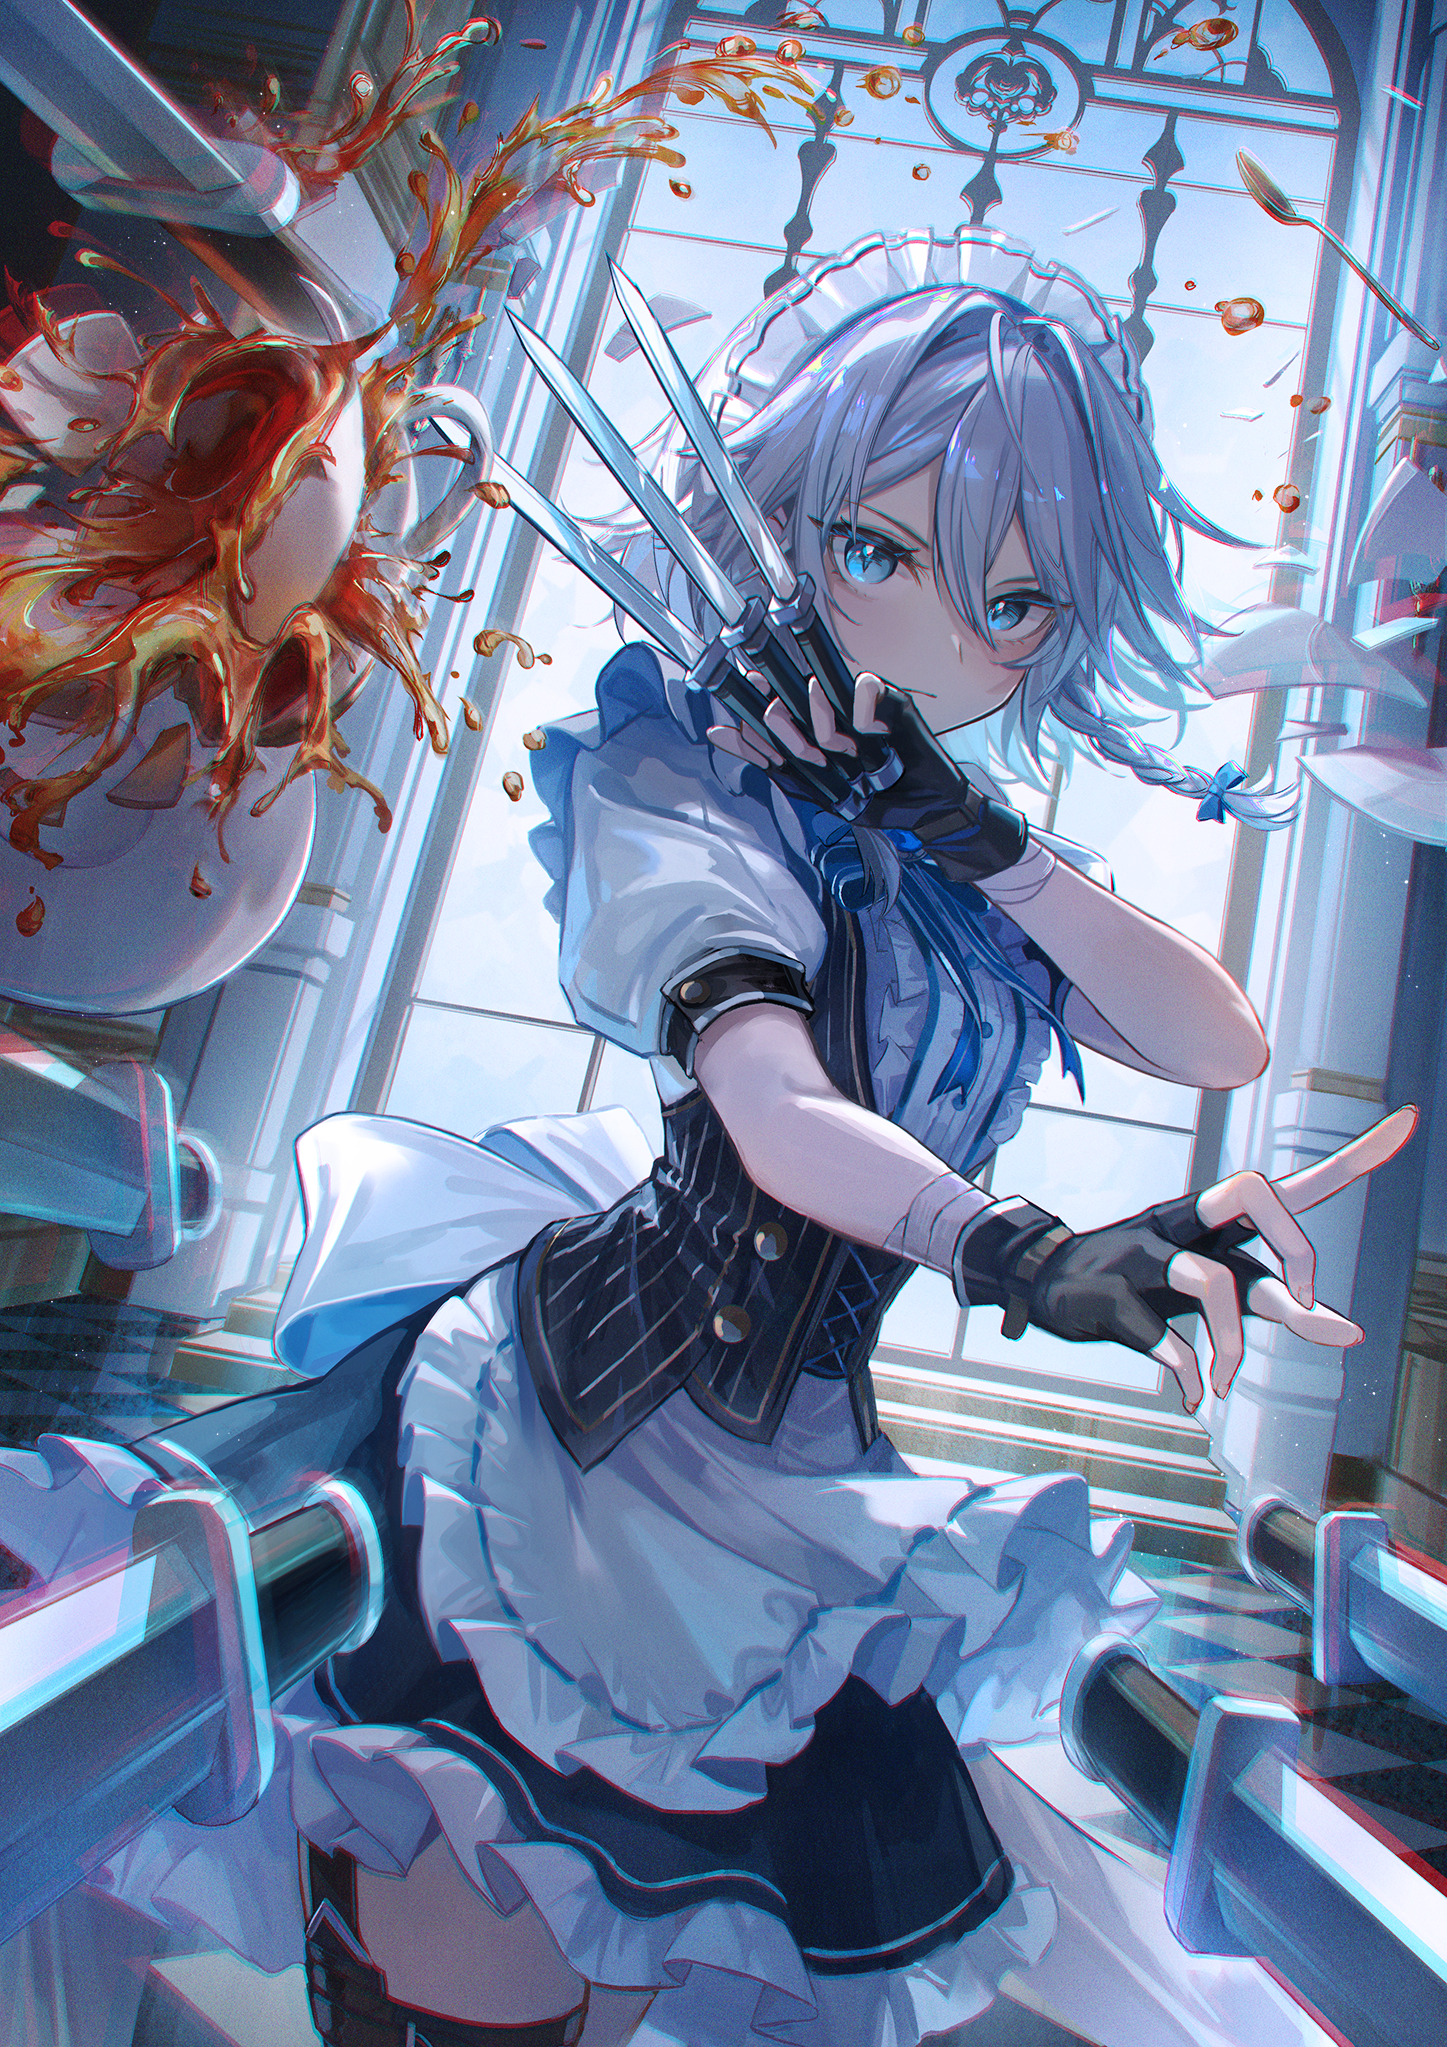 Anime 1447x2047 Pixiv anime anime girls Touhou Izayoi Sakuya knife gloves fingerless gloves looking at viewer drink broken glass braids blue eyes maid maid outfit short hair checkered portrait display weapon window hair bows silver hair cup